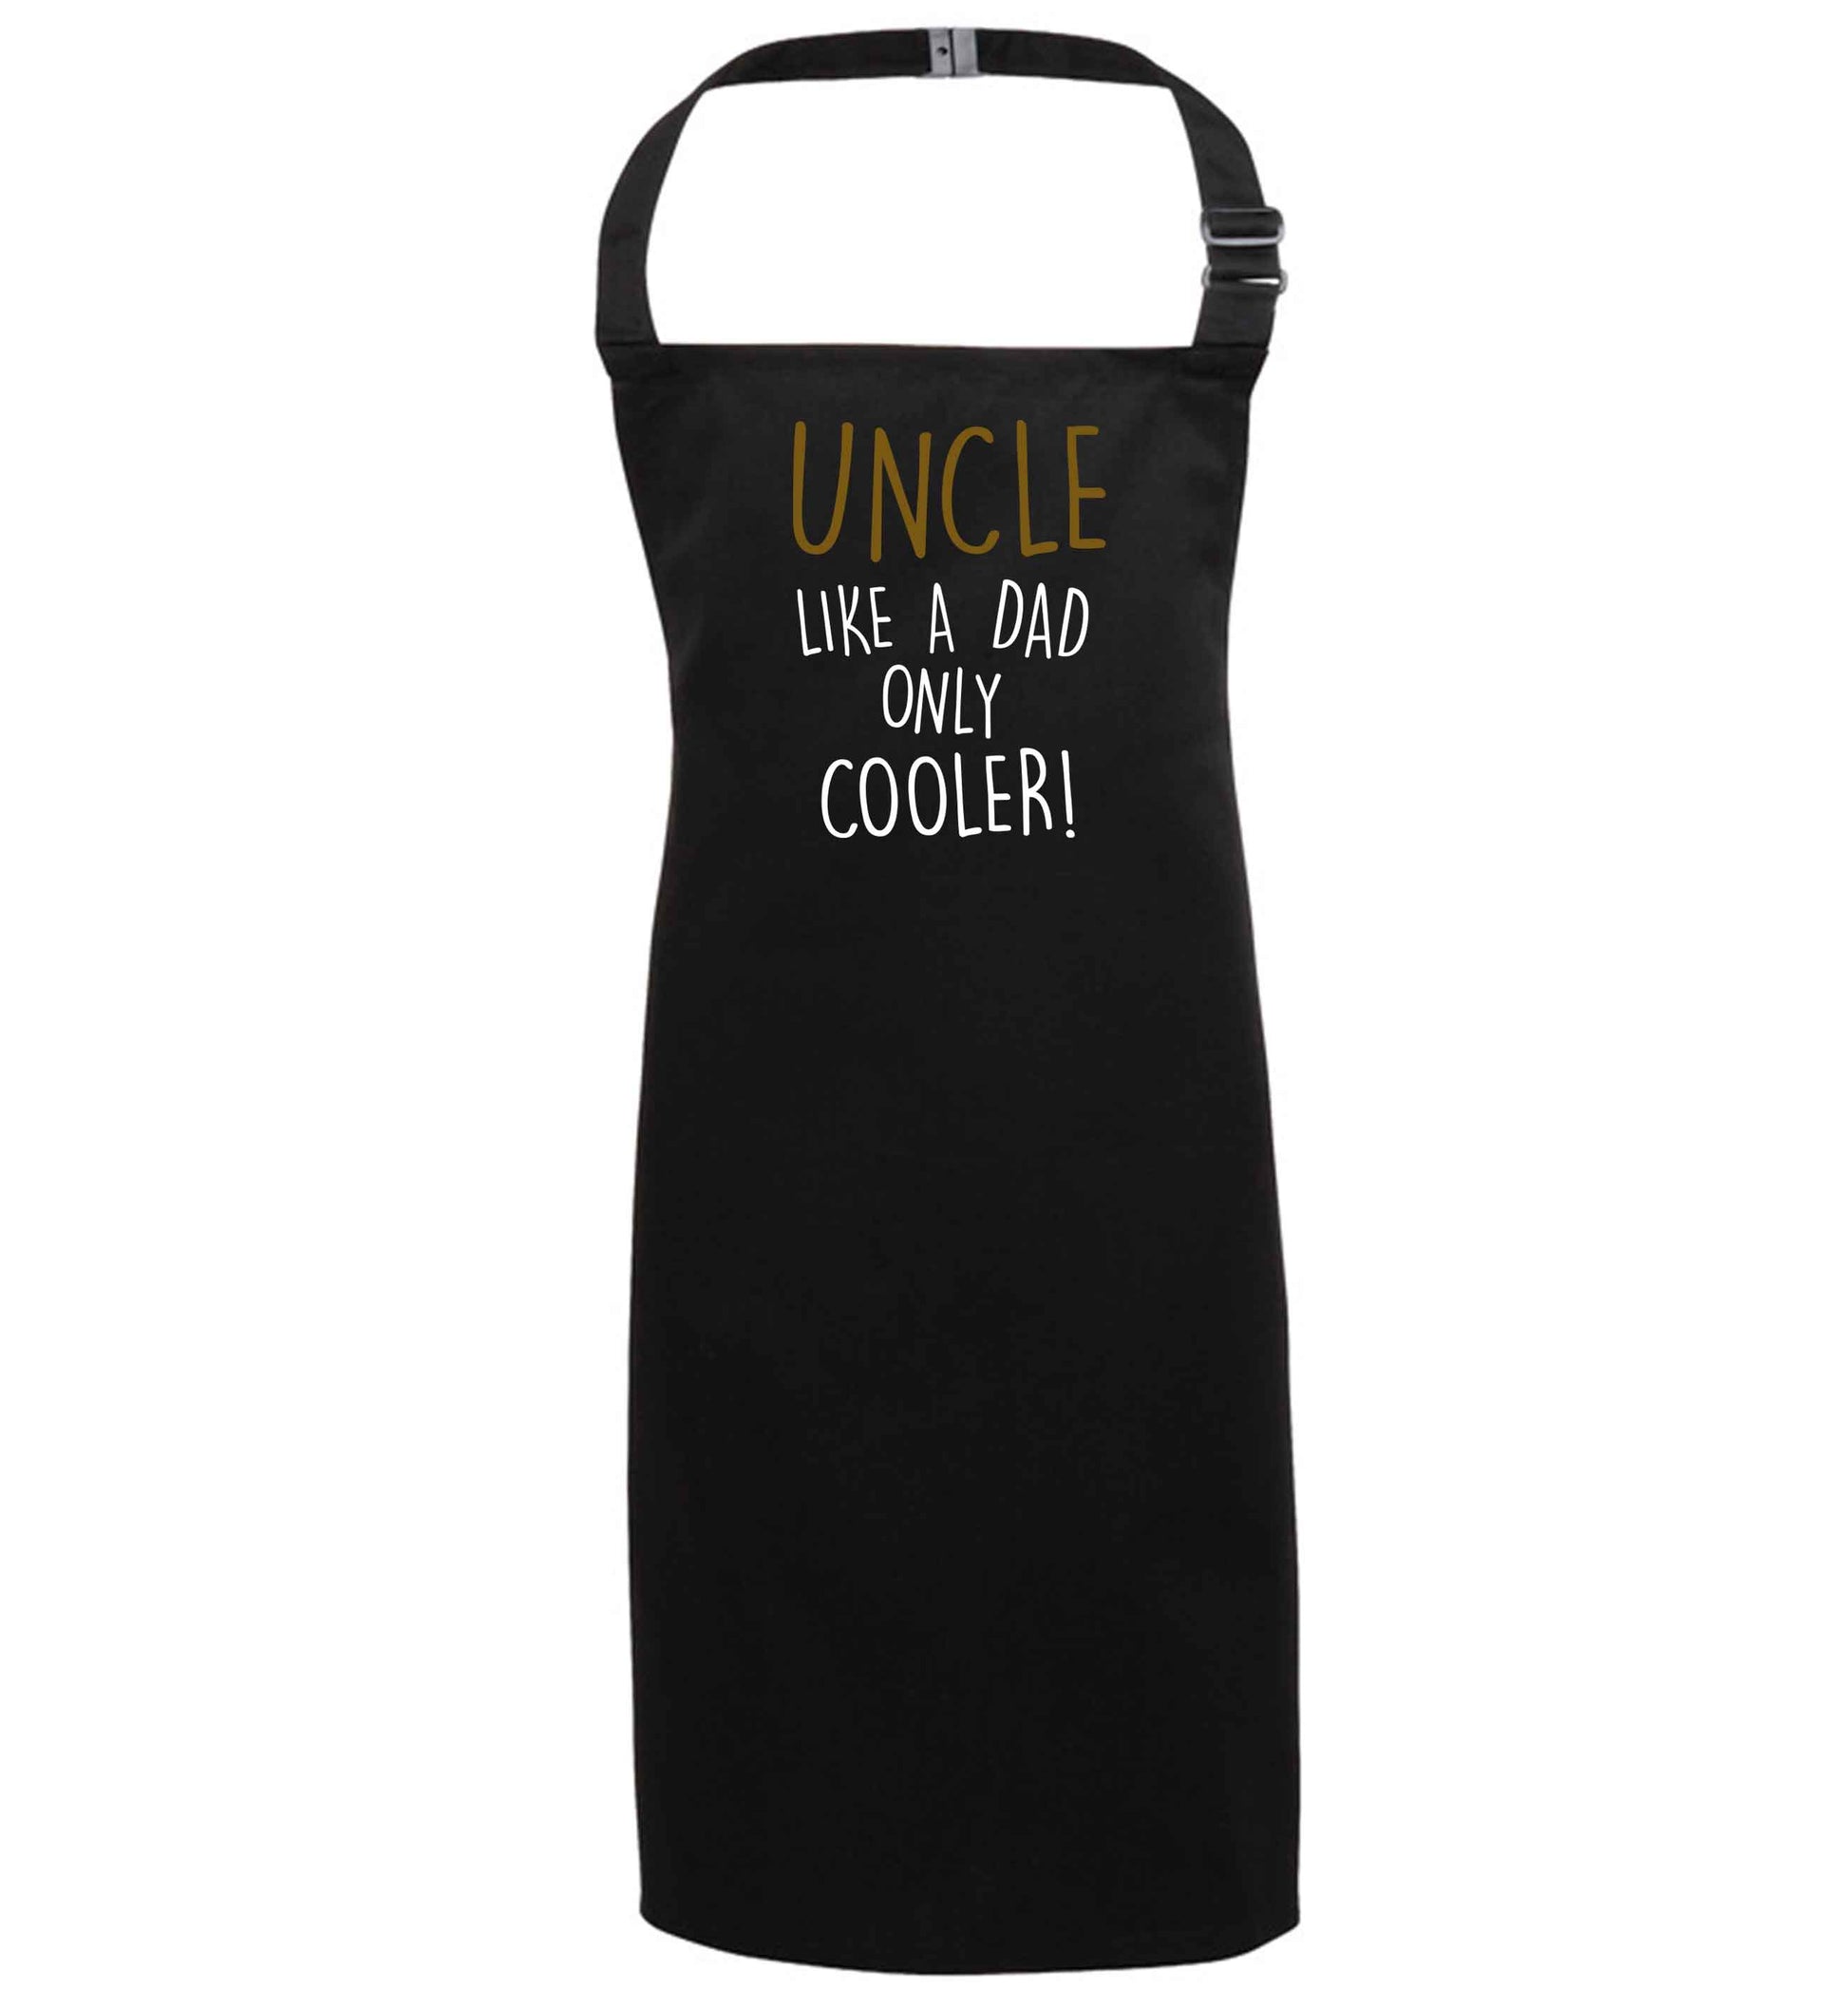 Uncle like a dad only cooler black apron 7-10 years